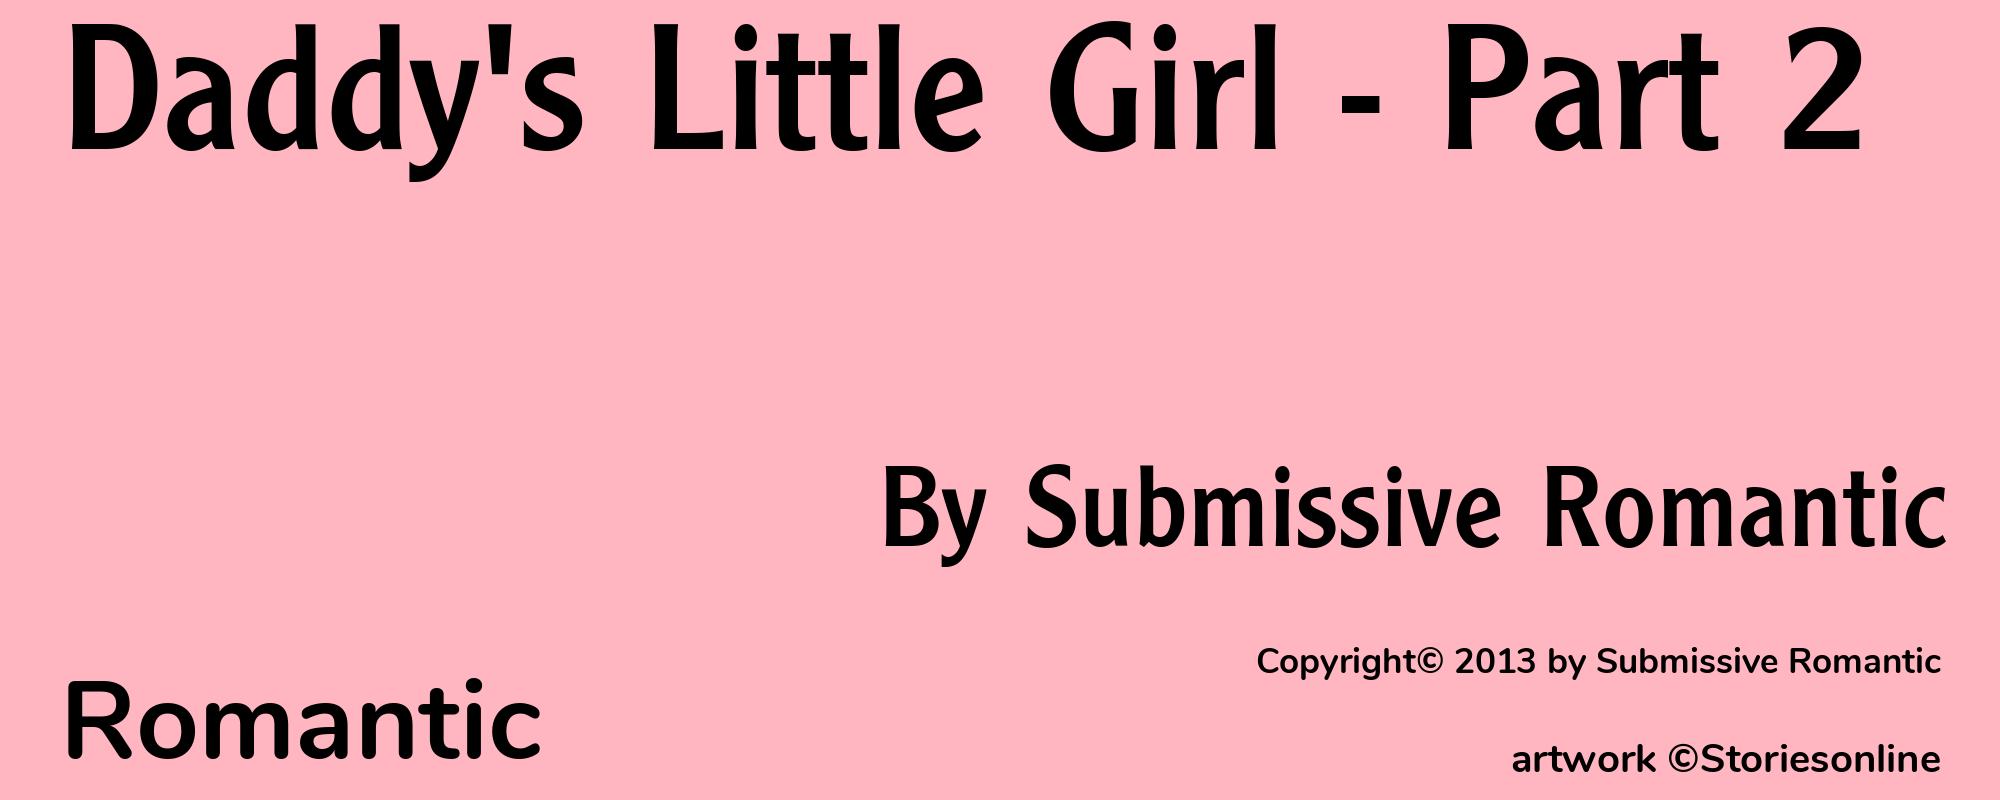 Daddy's Little Girl - Part 2 - Cover